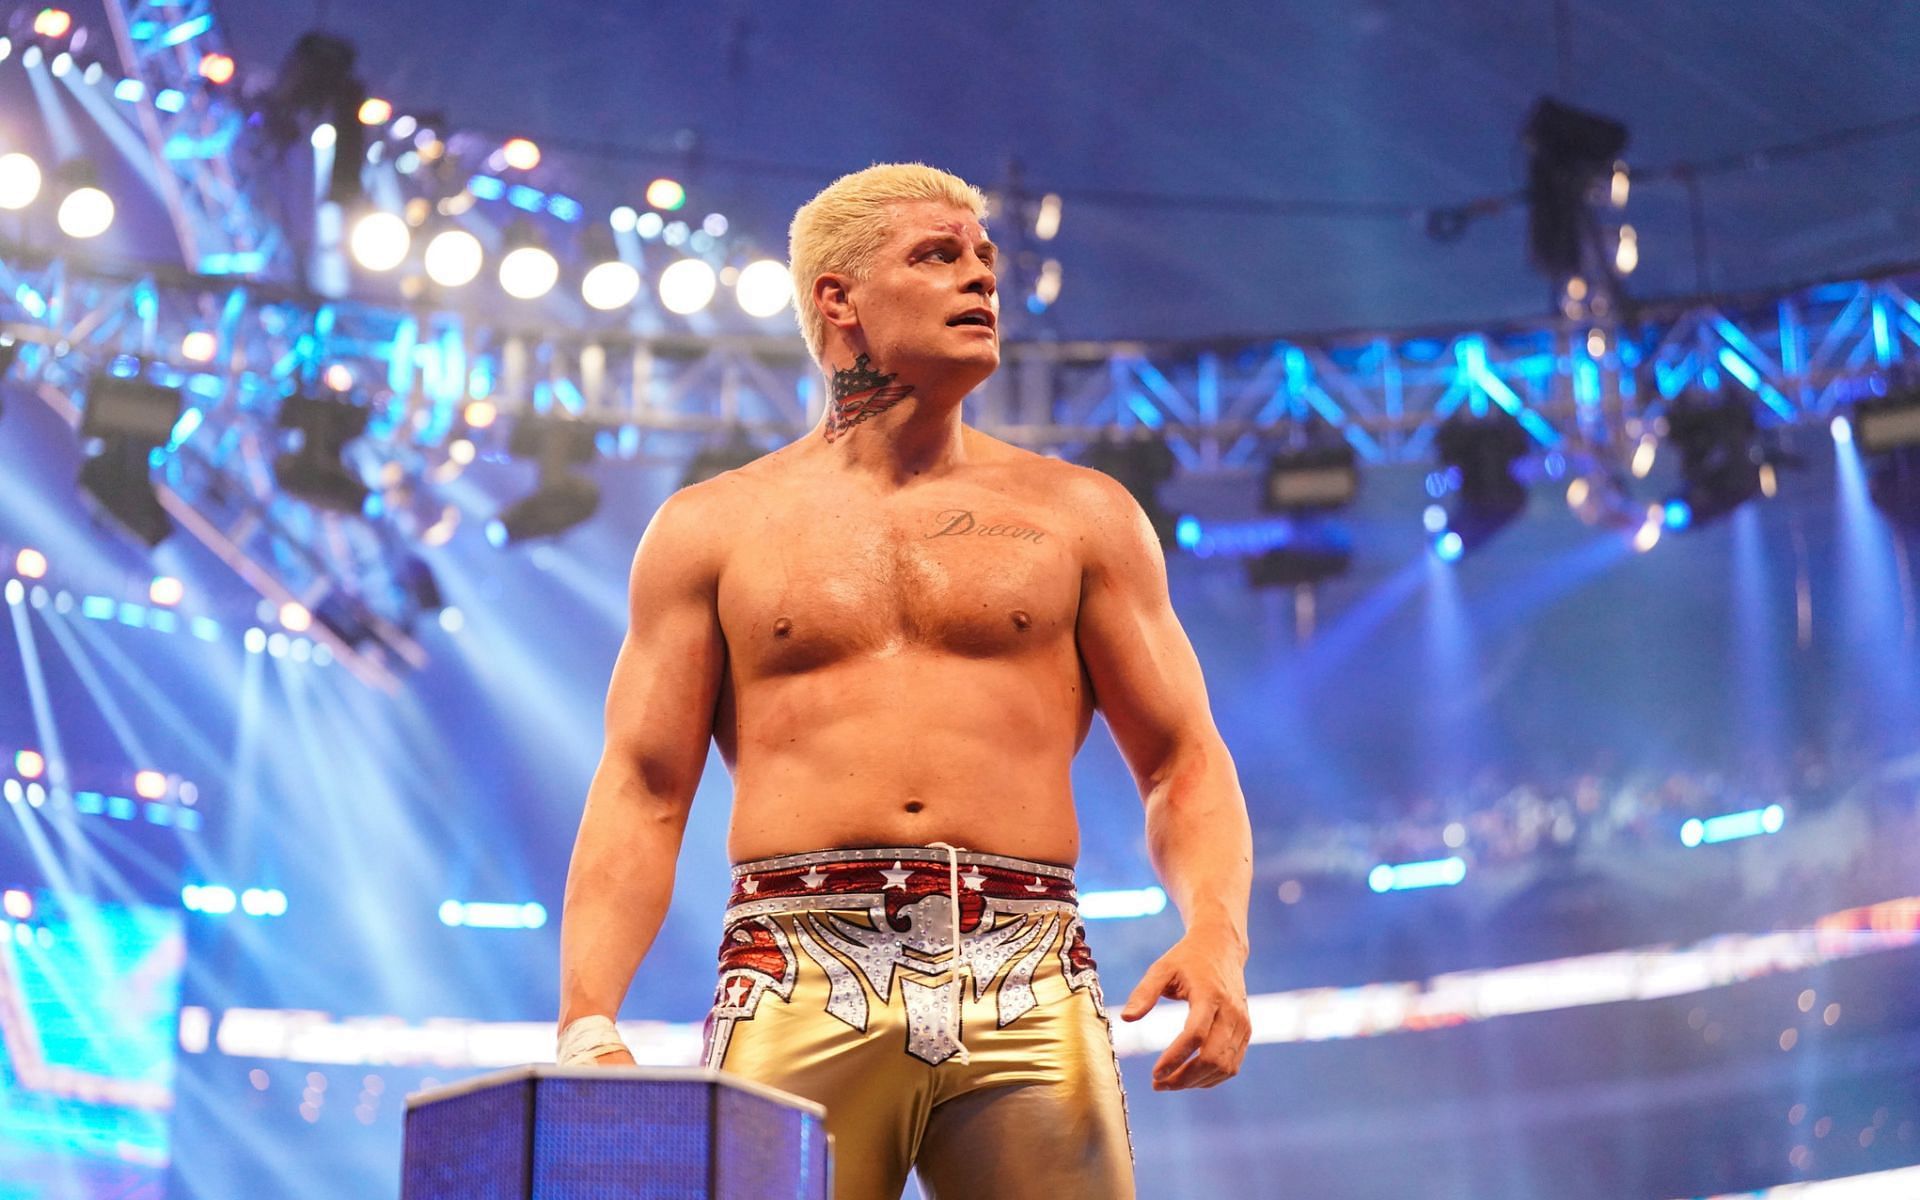 Cody Rhodes has been on a triumphant run since his return to WWE